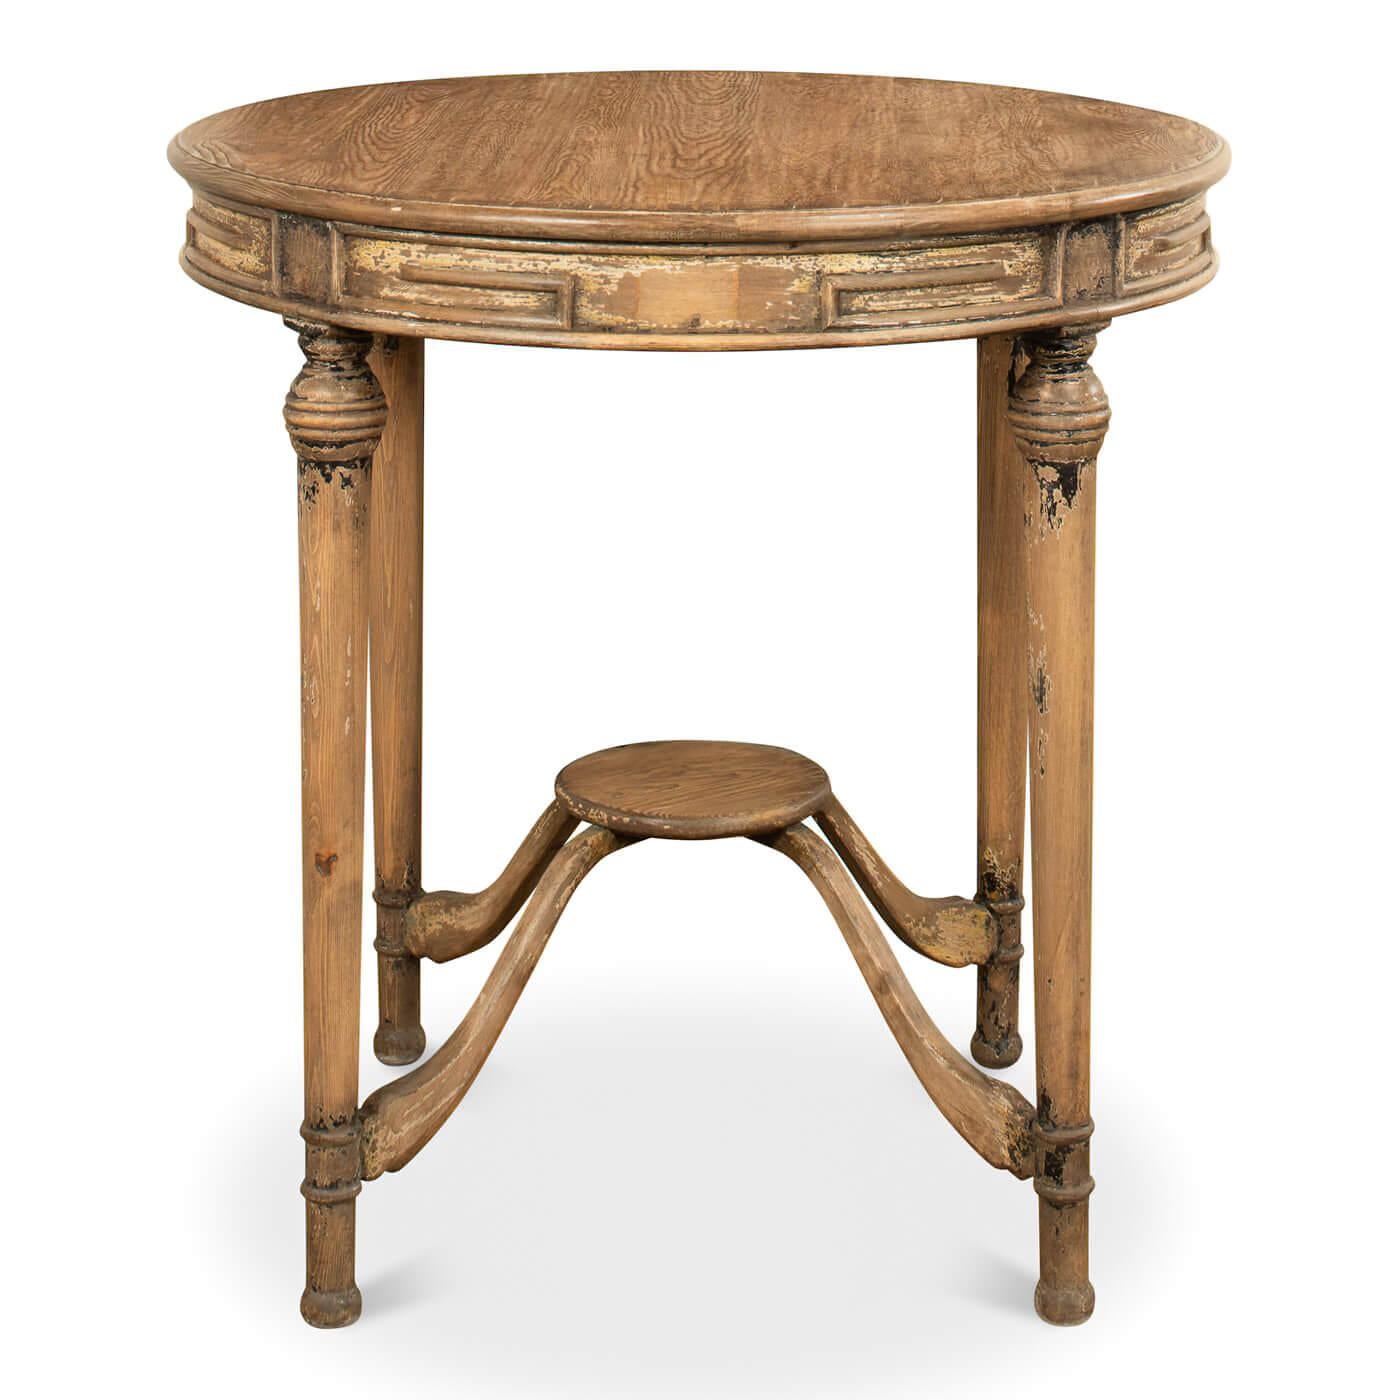 A rustic French country-style tea table. This table has an antiqued finish giving it the look and feel of a treasured heirloom. The round pine top has a warm brown finish and sits on a lovely curved stretcher base.

Dimension: 30